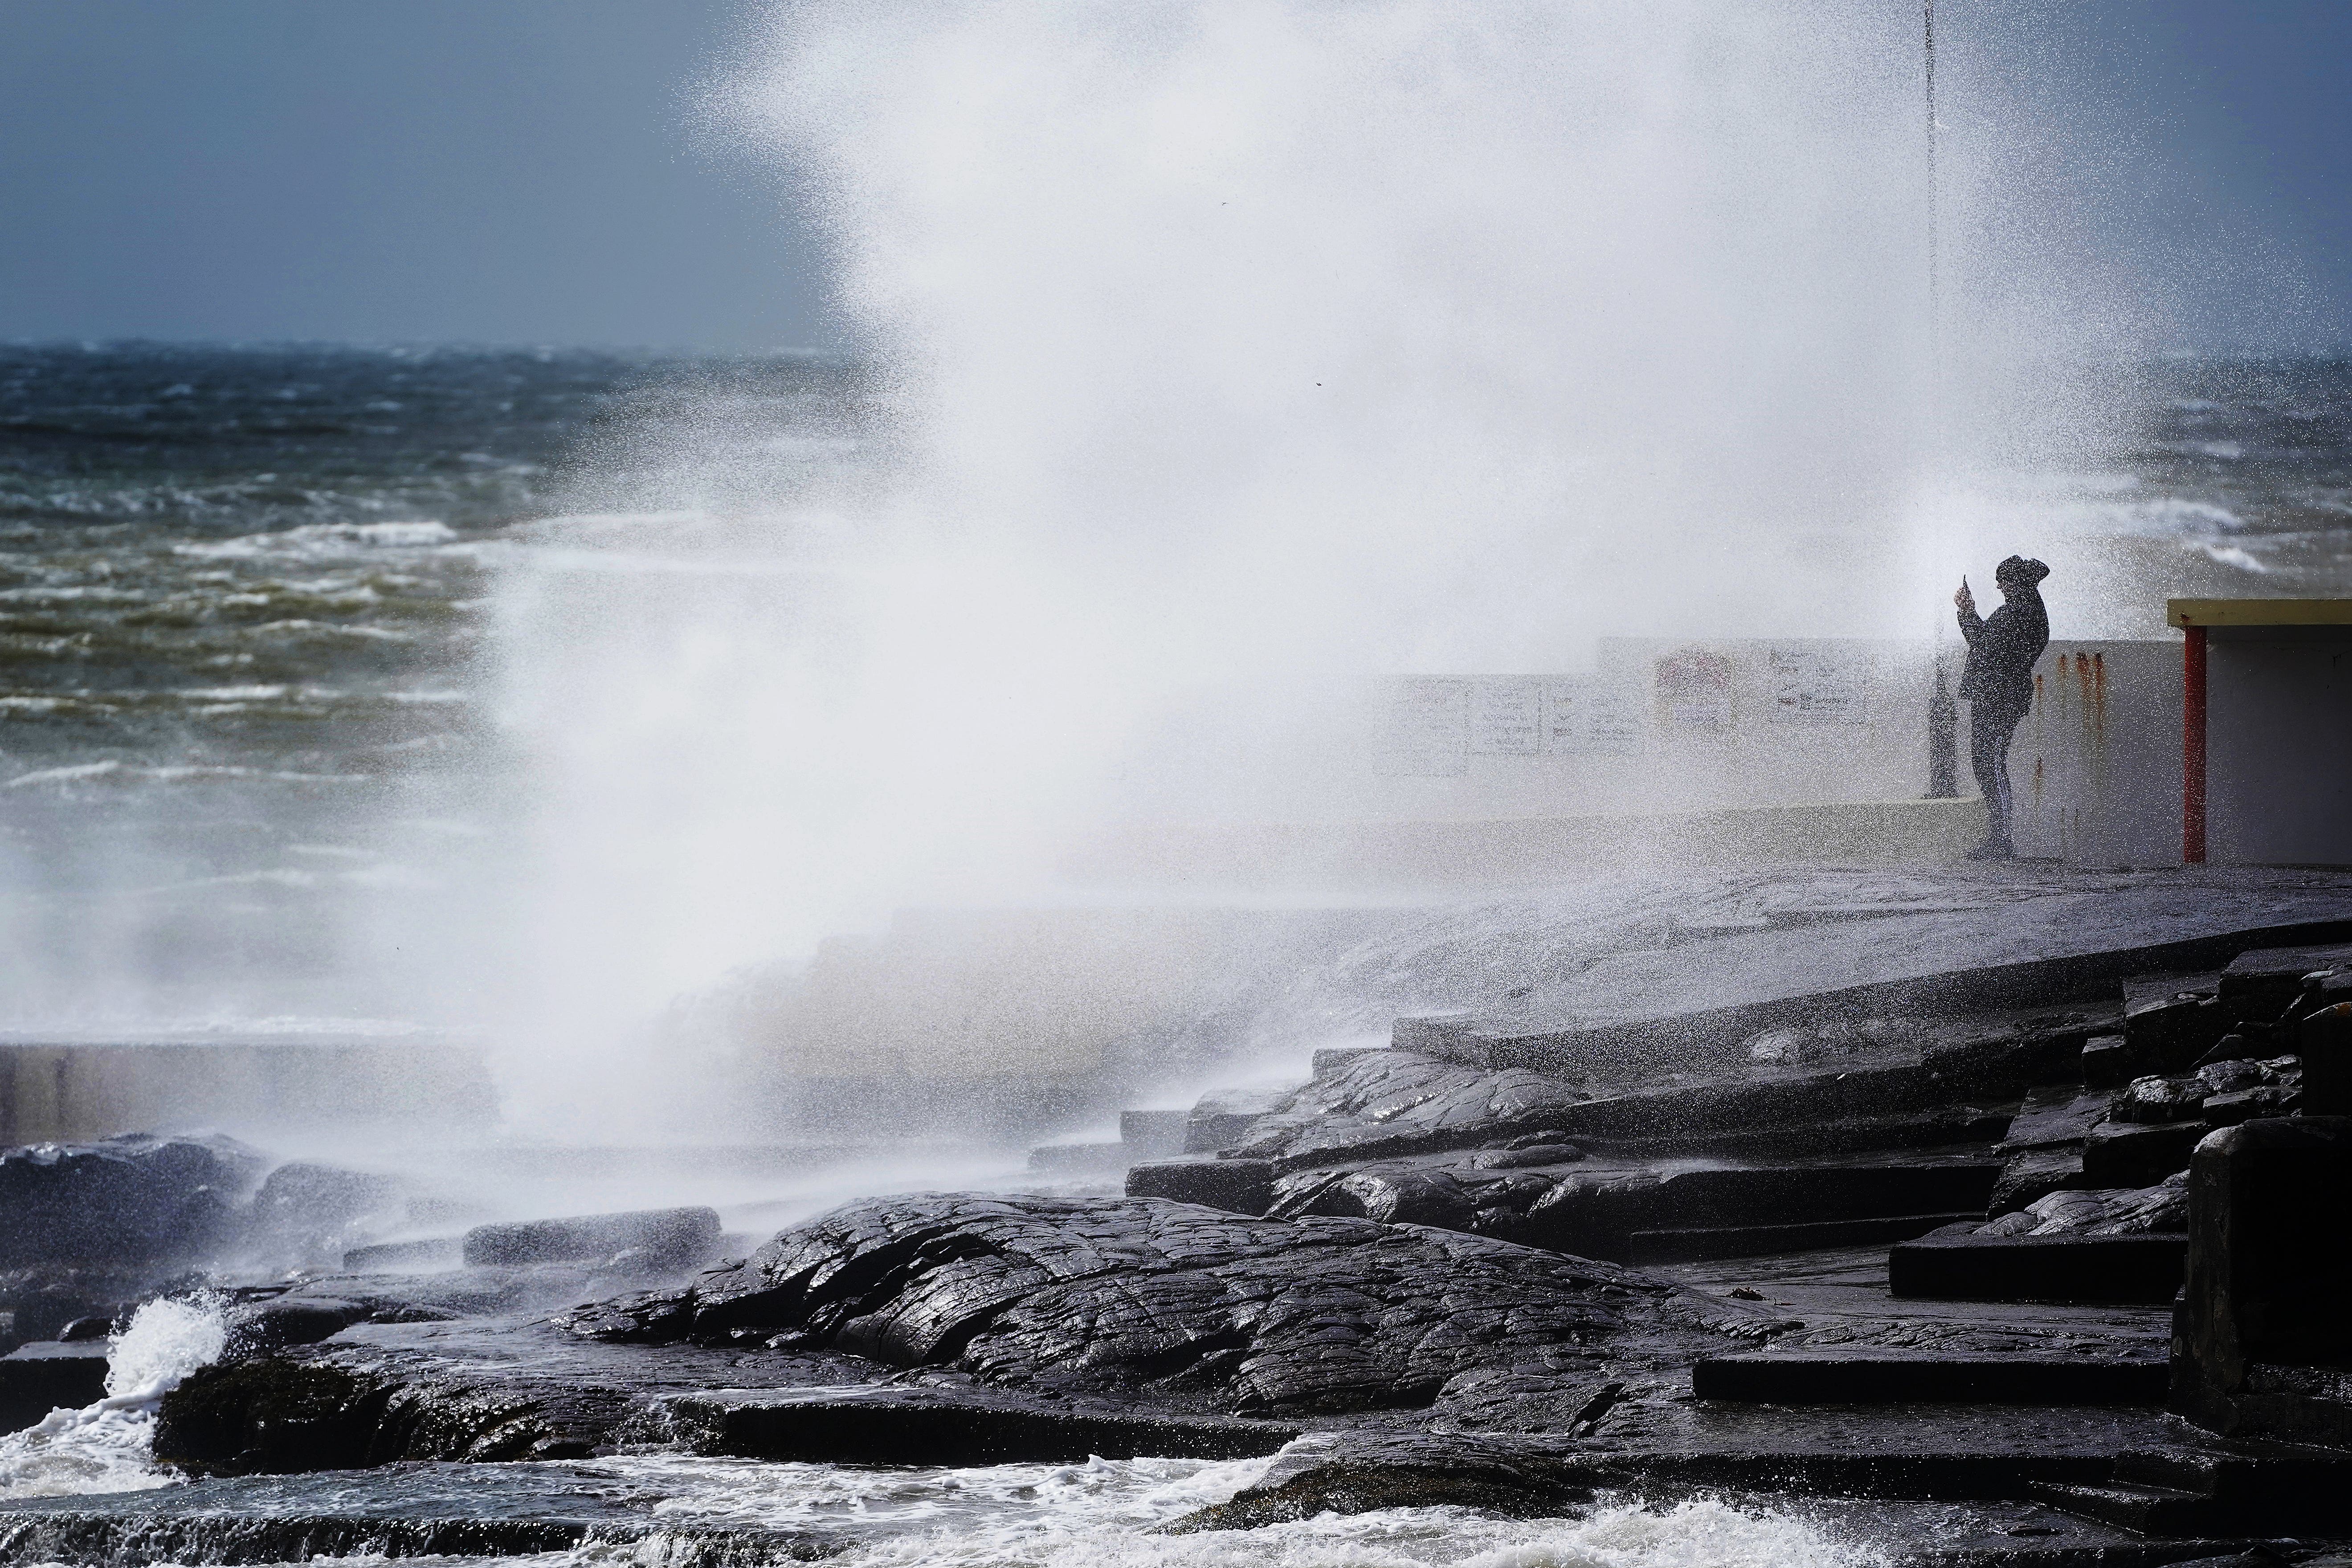 A man takes photos of the waves as Storm Kathleen rages on (Brian Lawless/PA)